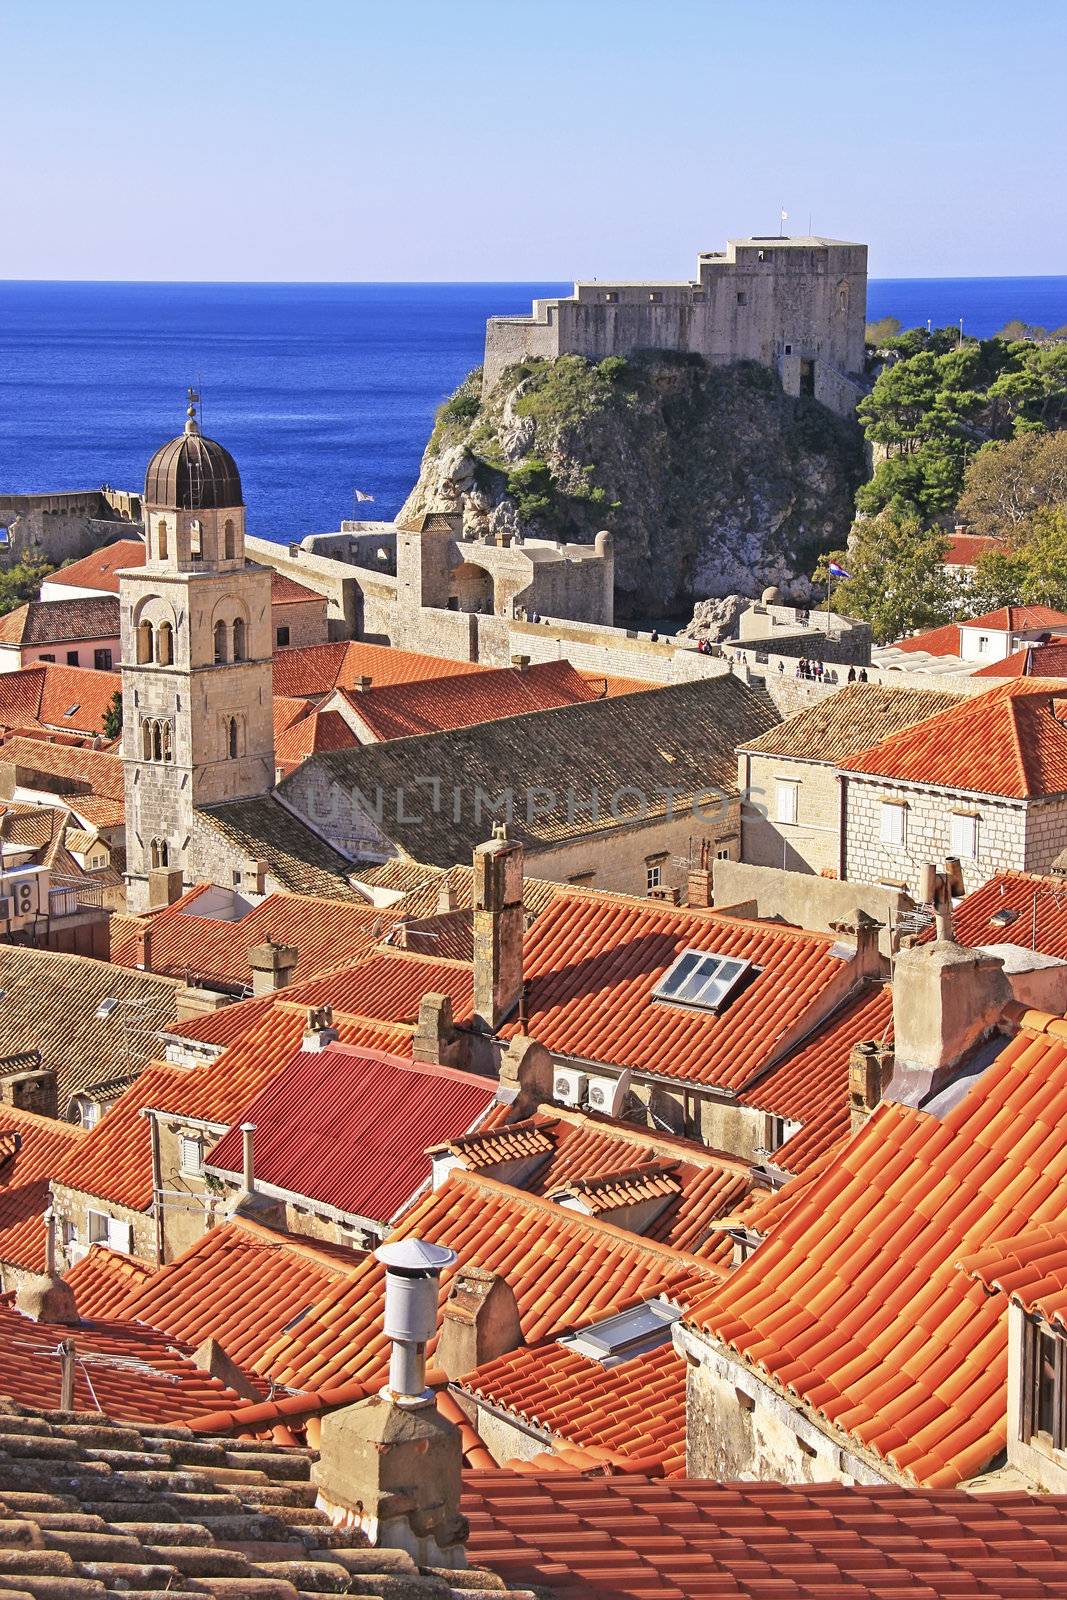 St. Lawrence Fortress and city of Dubrovnik, Croatia